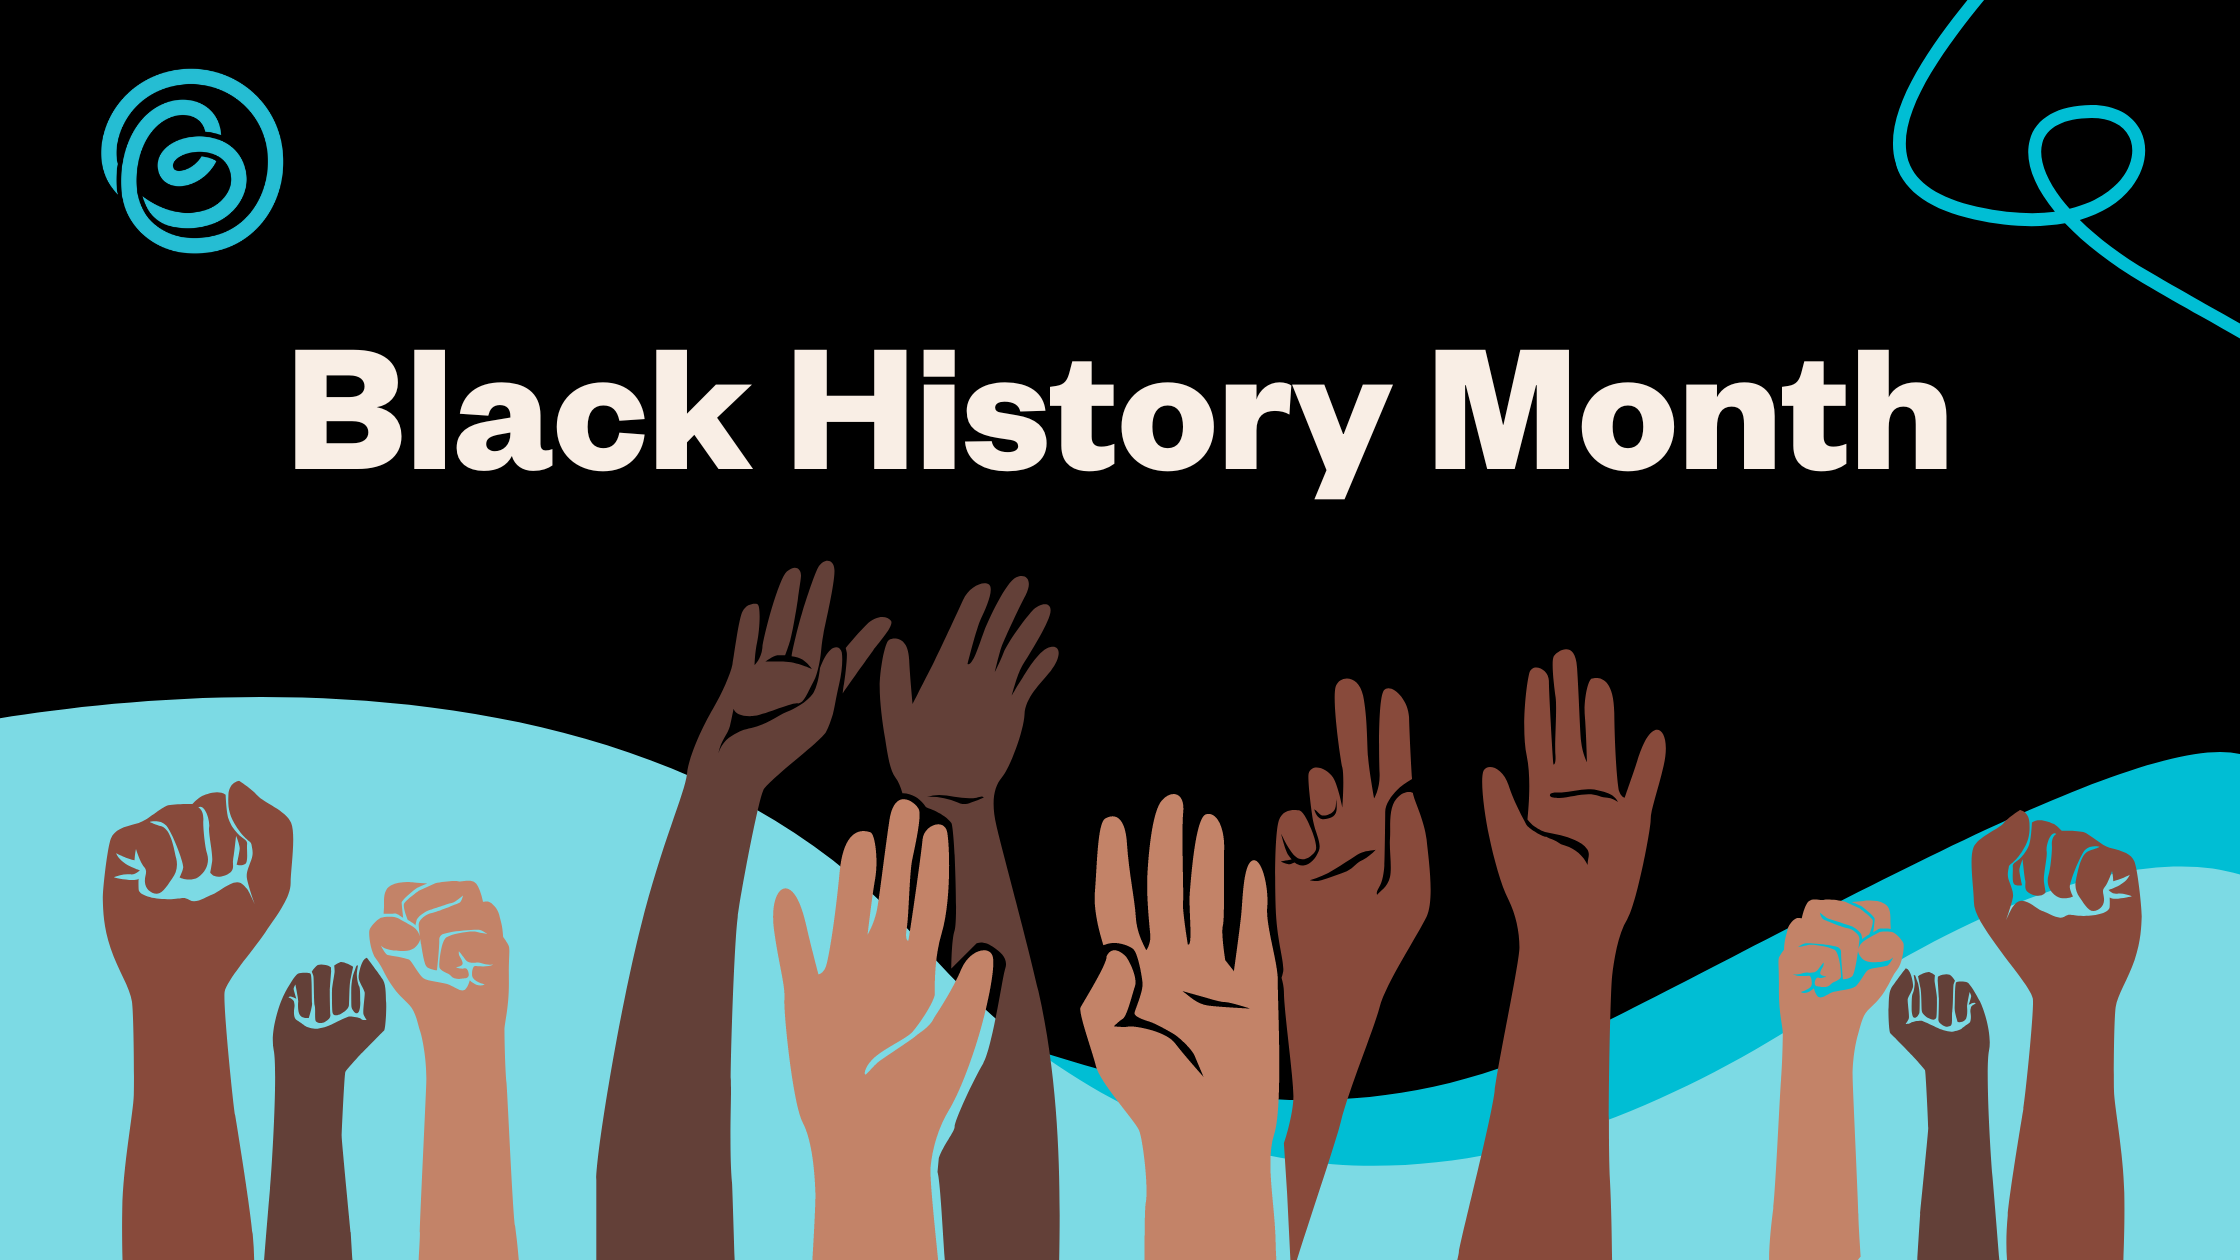 Graphic saying Black History Month with Black hands raised on a black and blue waved background